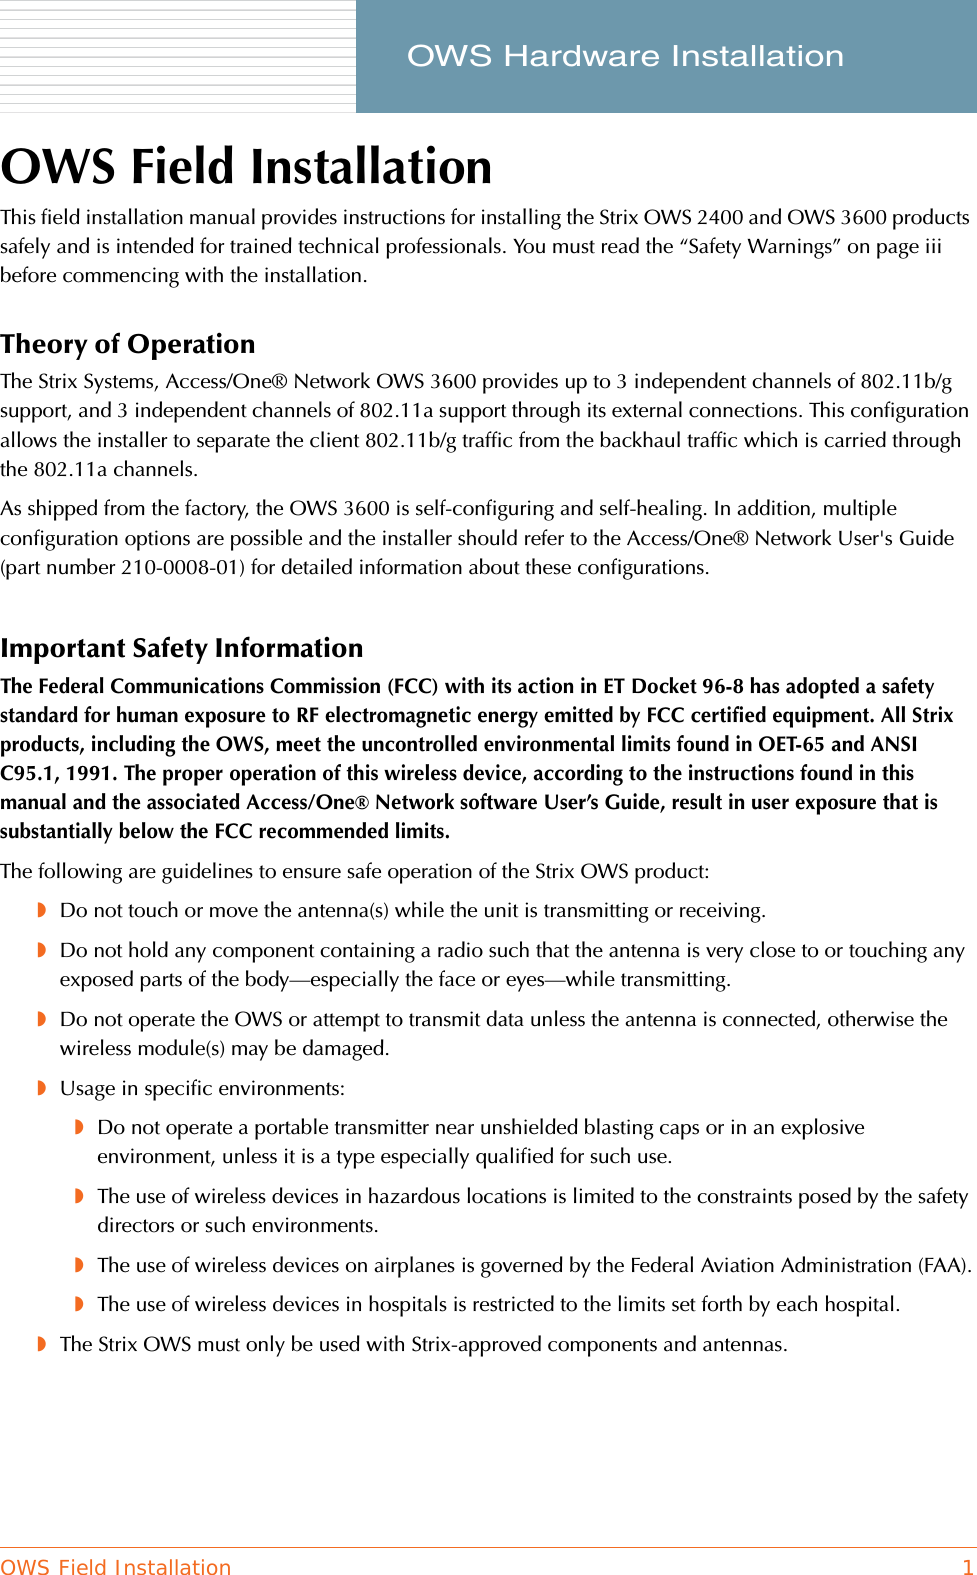 OWS Field Installation 1     OWS Hardware InstallationOWS Field InstallationThis field installation manual provides instructions for installing the Strix OWS 2400 and OWS 3600 products safely and is intended for trained technical professionals. You must read the “Safety Warnings” on page iii before commencing with the installation.Theory of OperationThe Strix Systems, Access/One® Network OWS 3600 provides up to 3 independent channels of 802.11b/g support, and 3 independent channels of 802.11a support through its external connections. This configuration allows the installer to separate the client 802.11b/g traffic from the backhaul traffic which is carried through the 802.11a channels.As shipped from the factory, the OWS 3600 is self-configuring and self-healing. In addition, multiple configuration options are possible and the installer should refer to the Access/One® Network User&apos;s Guide (part number 210-0008-01) for detailed information about these configurations.Important Safety InformationThe Federal Communications Commission (FCC) with its action in ET Docket 96-8 has adopted a safety standard for human exposure to RF electromagnetic energy emitted by FCC certified equipment. All Strix products, including the OWS, meet the uncontrolled environmental limits found in OET-65 and ANSI C95.1, 1991. The proper operation of this wireless device, according to the instructions found in this manual and the associated Access/One® Network software User’s Guide, result in user exposure that is substantially below the FCC recommended limits.The following are guidelines to ensure safe operation of the Strix OWS product:◗Do not touch or move the antenna(s) while the unit is transmitting or receiving.◗Do not hold any component containing a radio such that the antenna is very close to or touching any exposed parts of the body—especially the face or eyes—while transmitting.◗Do not operate the OWS or attempt to transmit data unless the antenna is connected, otherwise the wireless module(s) may be damaged.◗Usage in specific environments:◗Do not operate a portable transmitter near unshielded blasting caps or in an explosive environment, unless it is a type especially qualified for such use.◗The use of wireless devices in hazardous locations is limited to the constraints posed by the safety directors or such environments.◗The use of wireless devices on airplanes is governed by the Federal Aviation Administration (FAA).◗The use of wireless devices in hospitals is restricted to the limits set forth by each hospital.◗The Strix OWS must only be used with Strix-approved components and antennas.